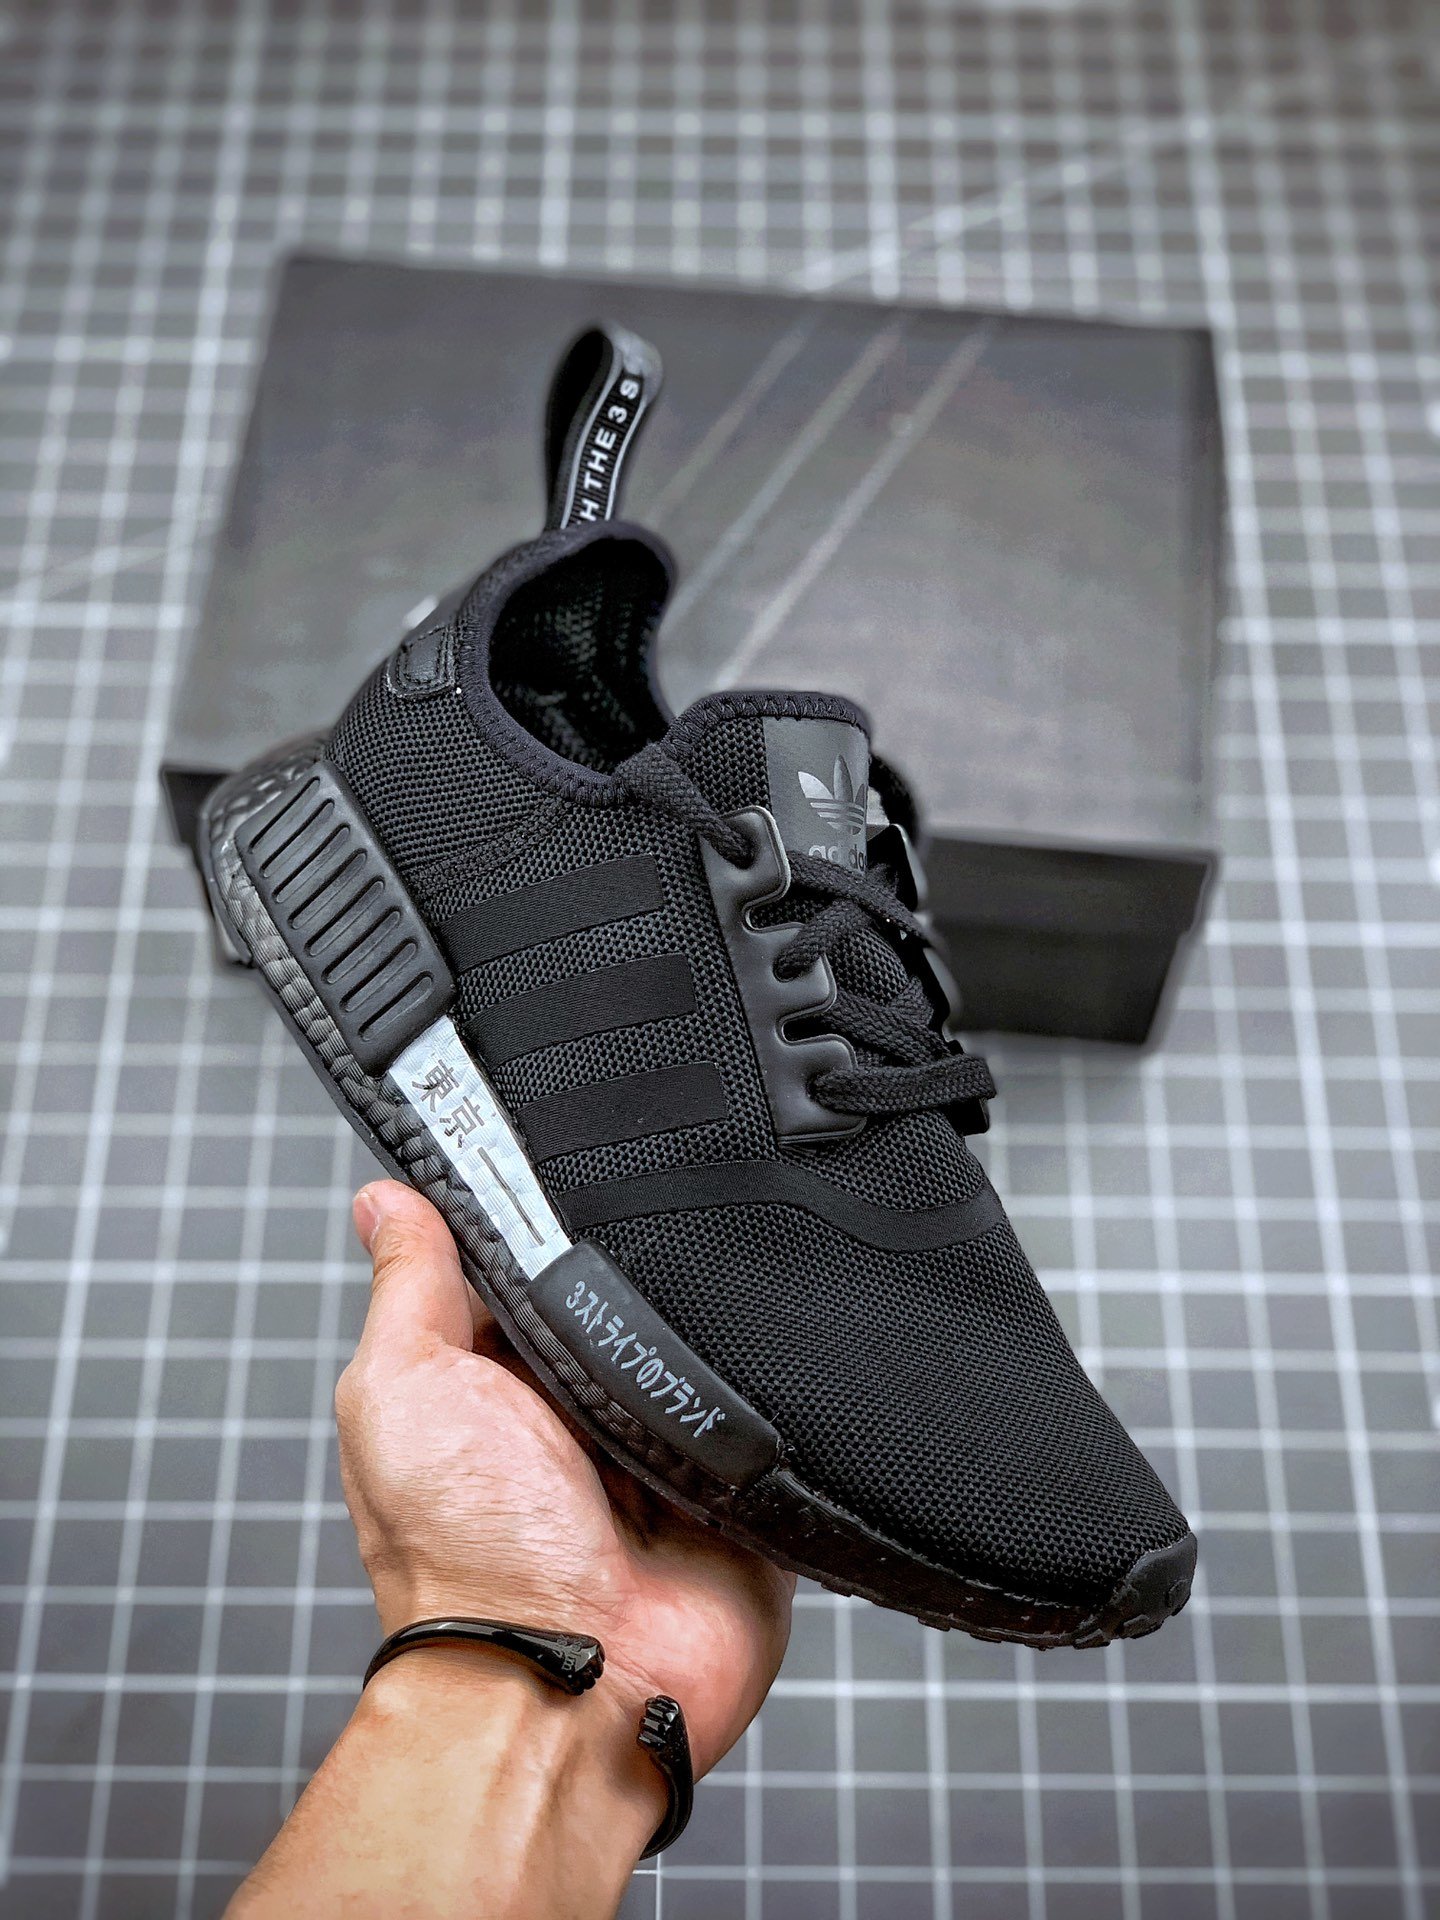 adidas NMD R1 “Tokyo” Black H67746 For Sale – Sneaker Hello